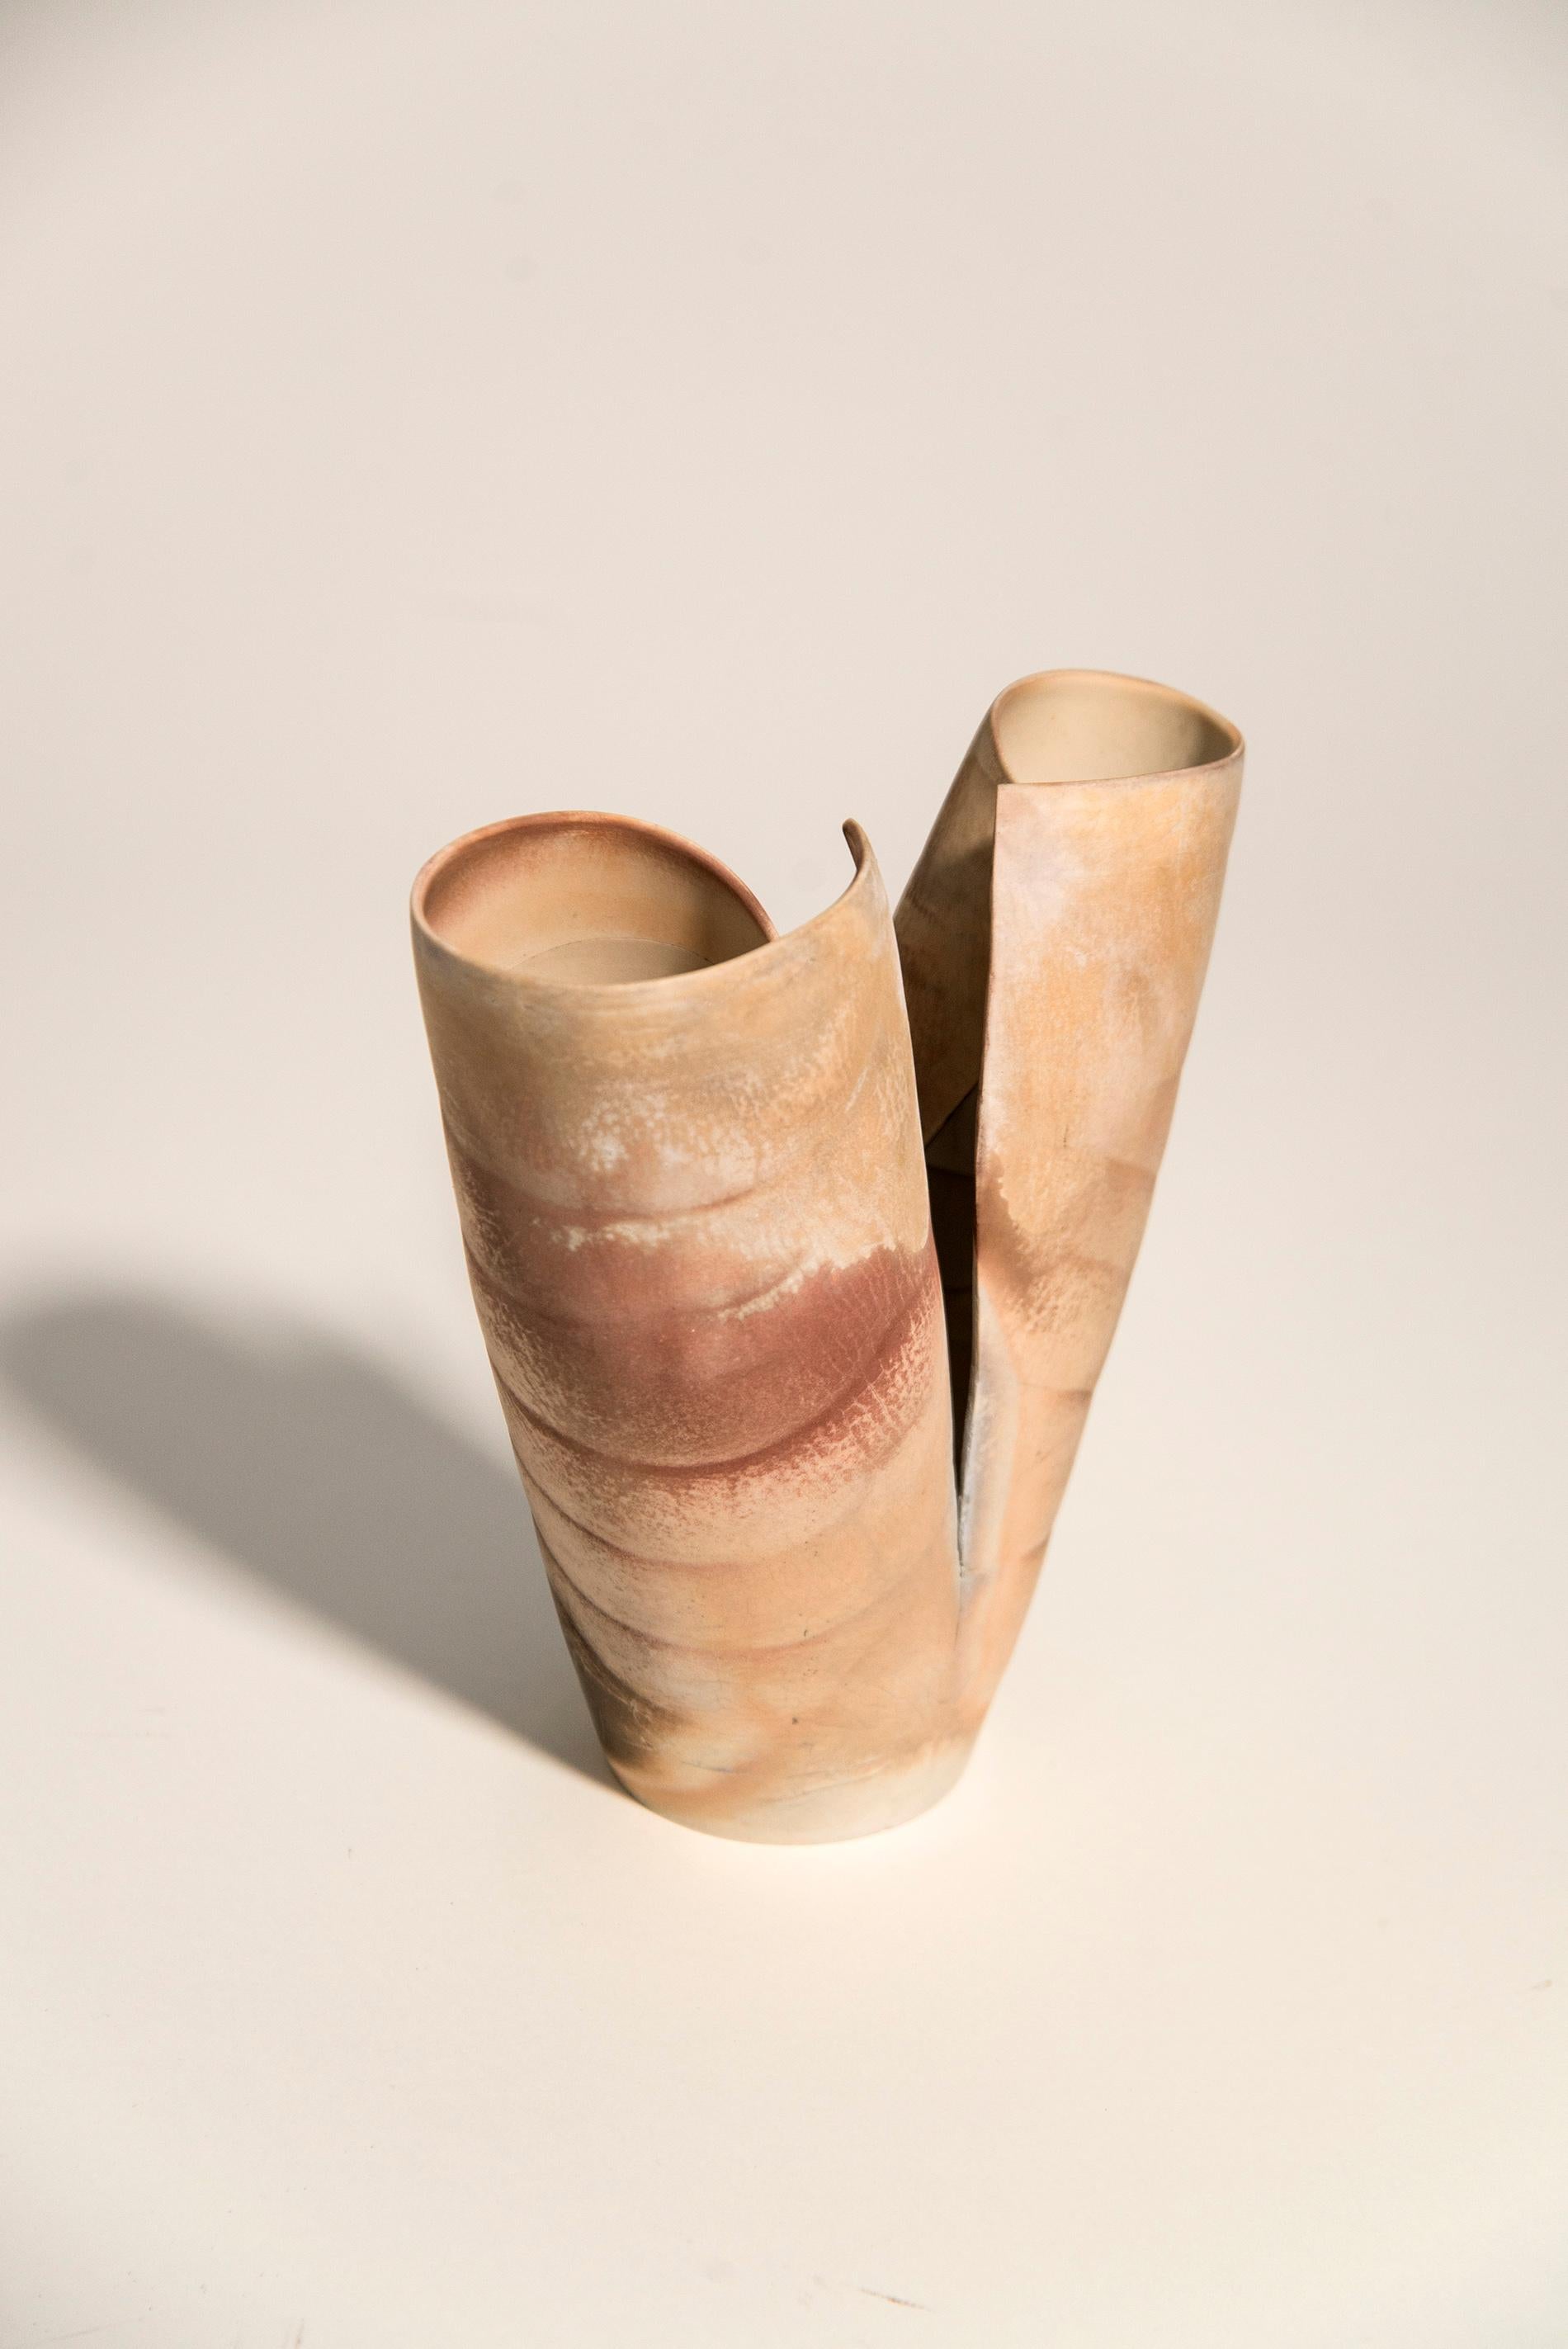 Joined at the Hip - intricate, nature-inspired, hand-shaped porcelain sculpture 2